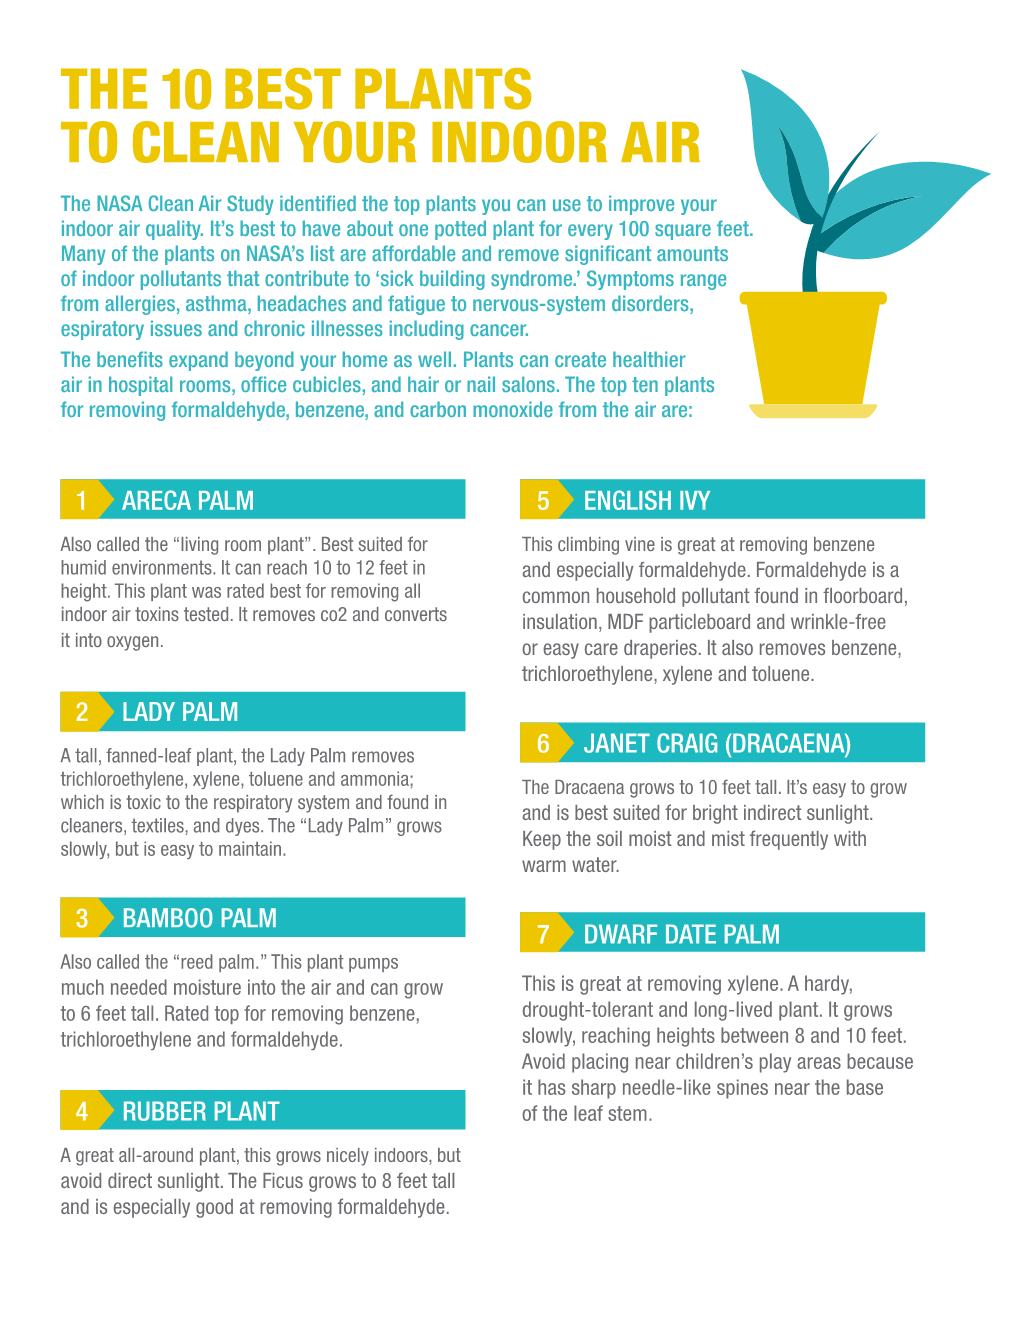 THE 10 BEST PLANTS to CLEAN YOUR INDOOR AIR the NASA Clean Air Study Identified the Top Plants You Can Use to Improve Your Indoor Air Quality